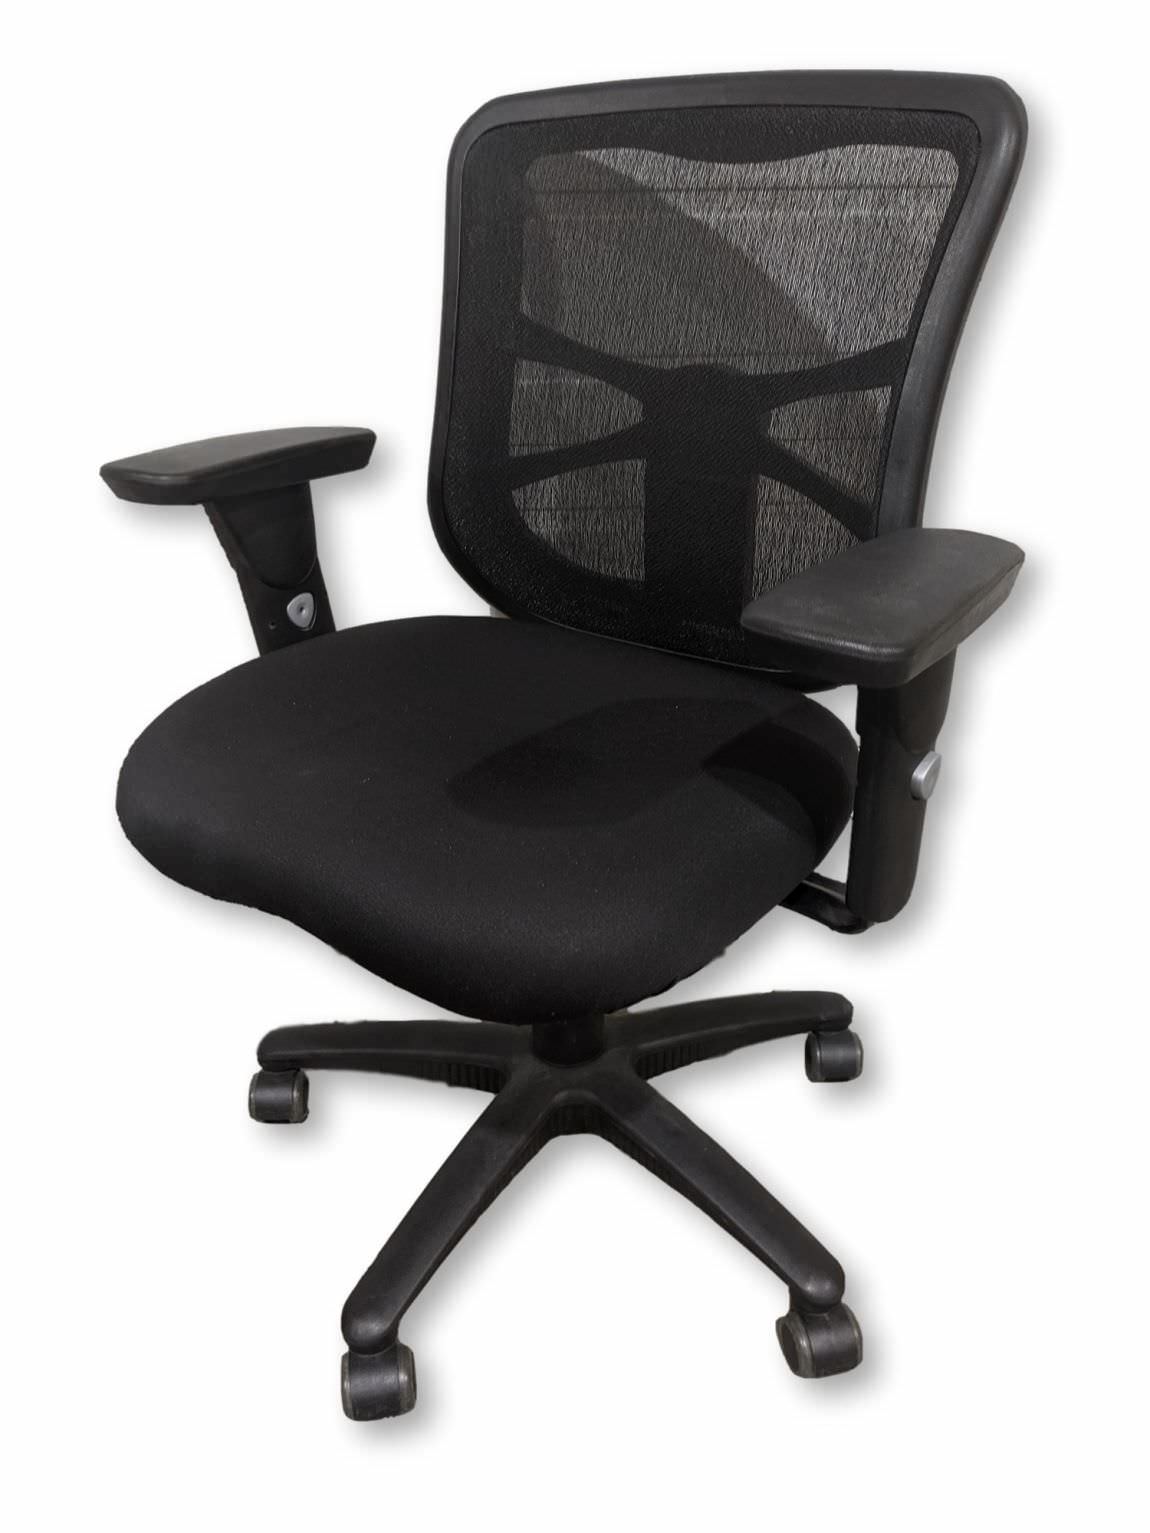 3587 Black Mesh Back Rolling Office Chair 1 